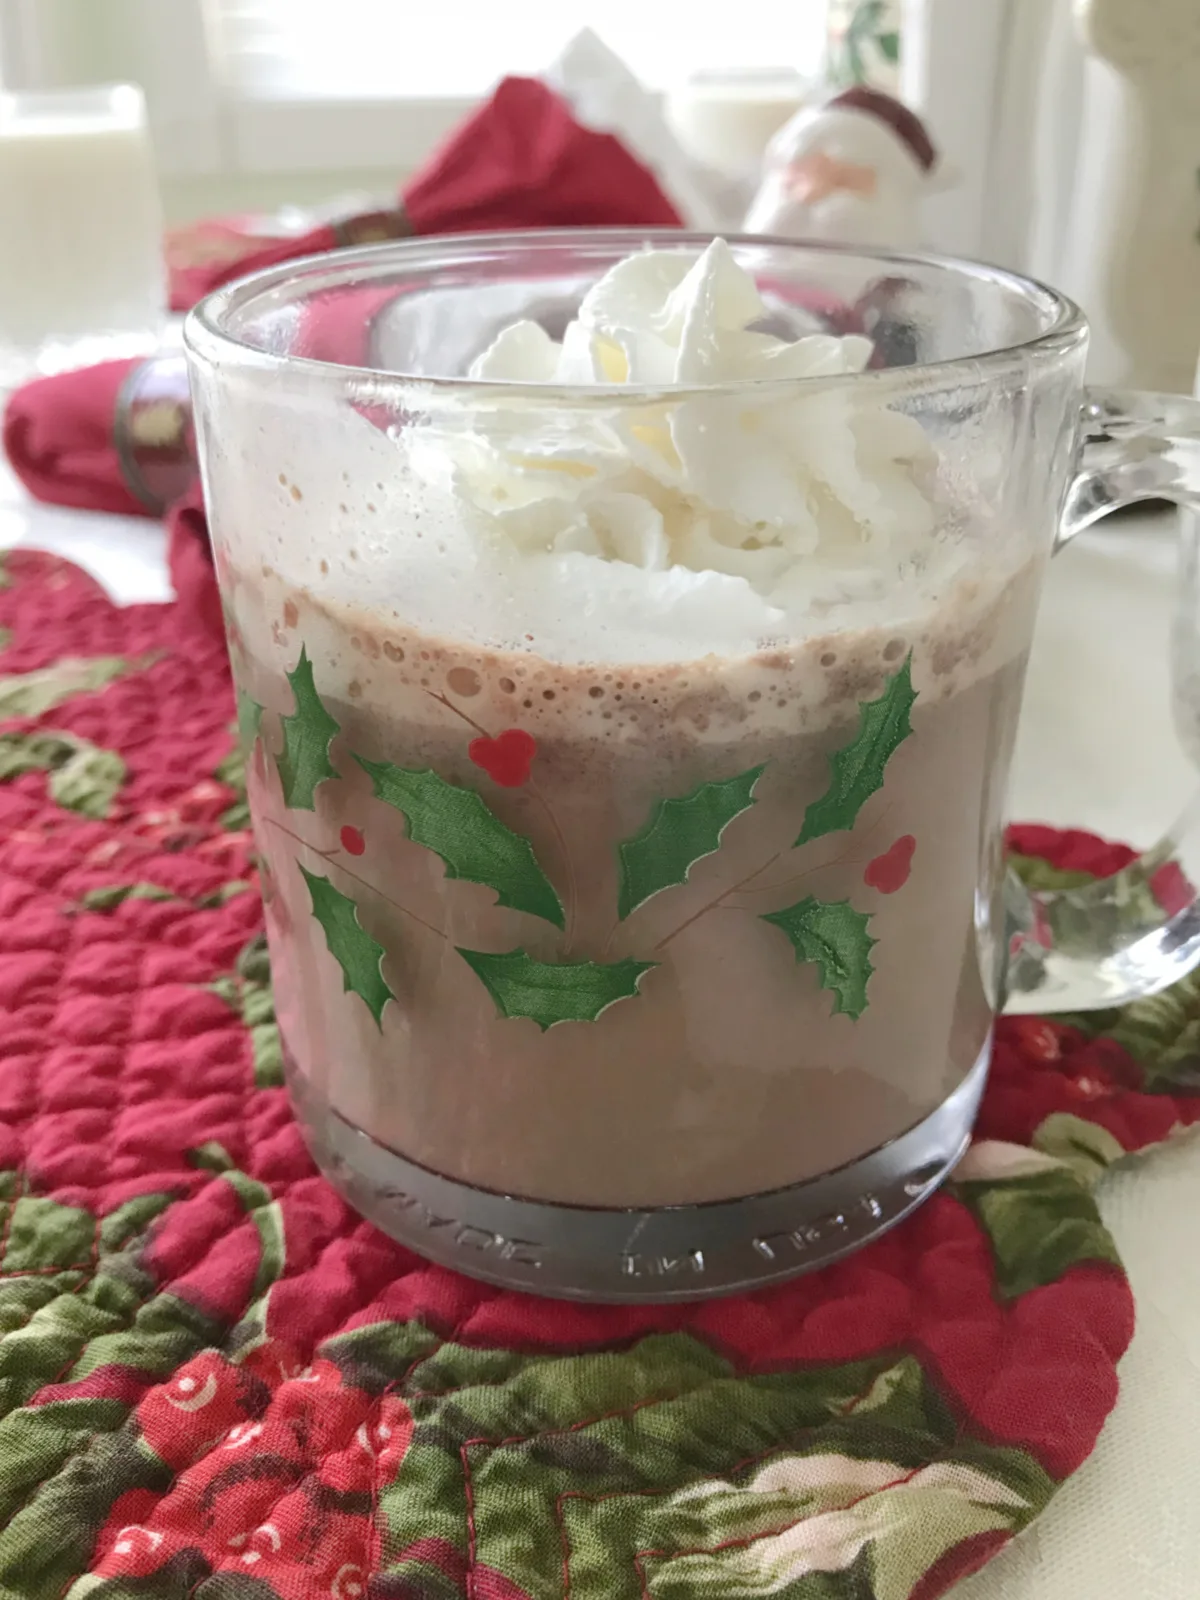 Hot chocolate topped with whipped cream in a Christmas mug.